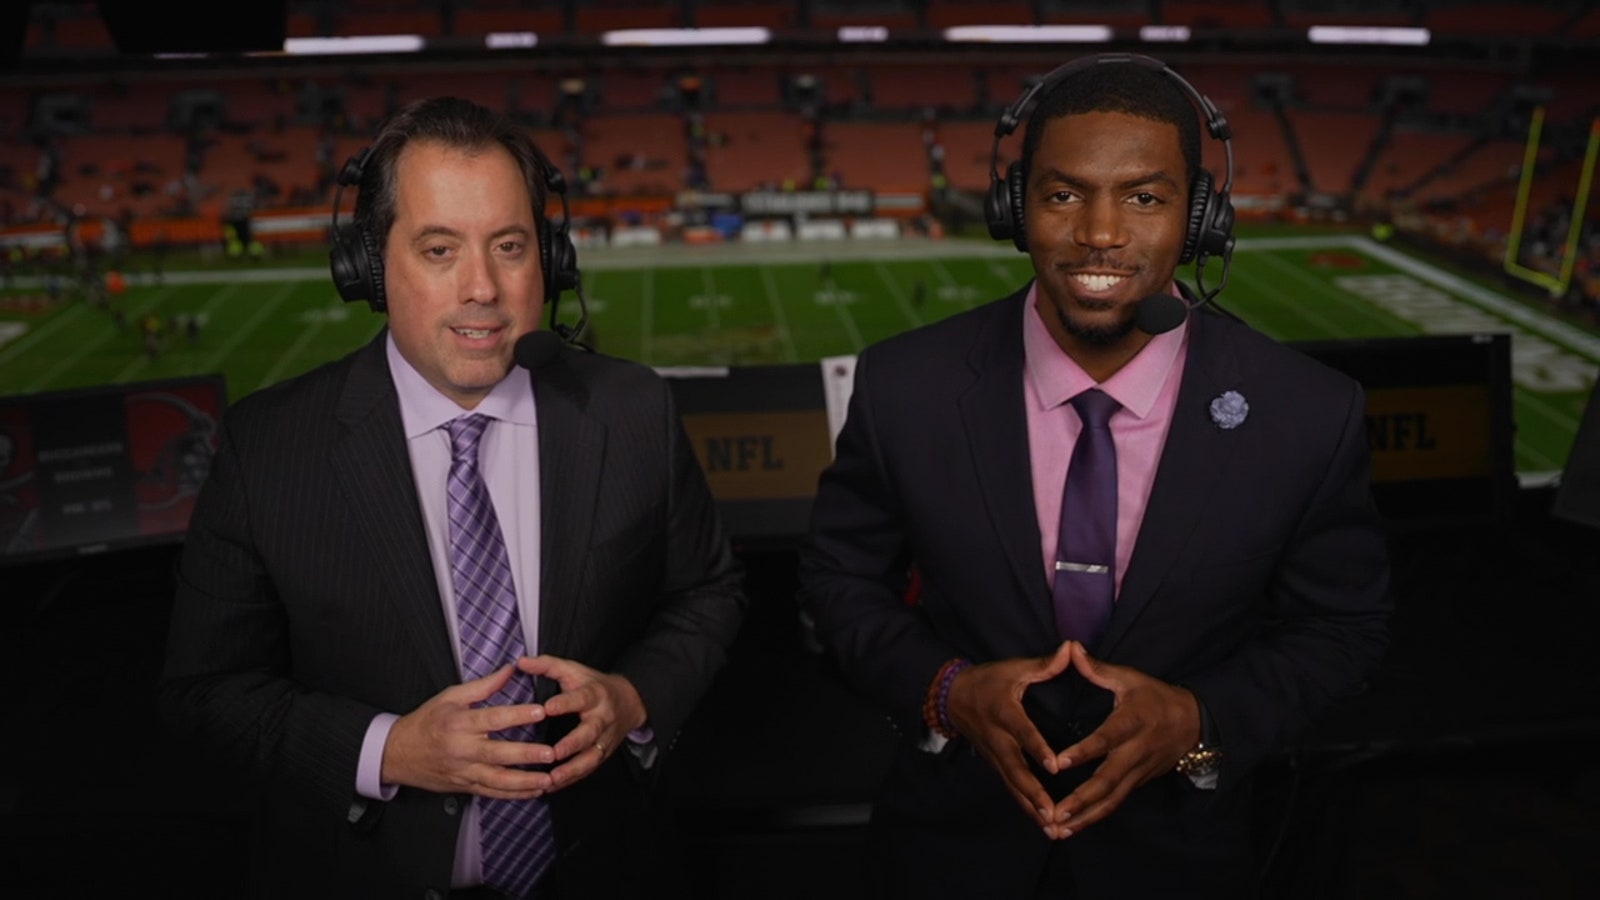 Kenny Albert and Jonathan Vilma discuss Nick Chubb's big rushing day in the Browns' victory over the Buccaneers